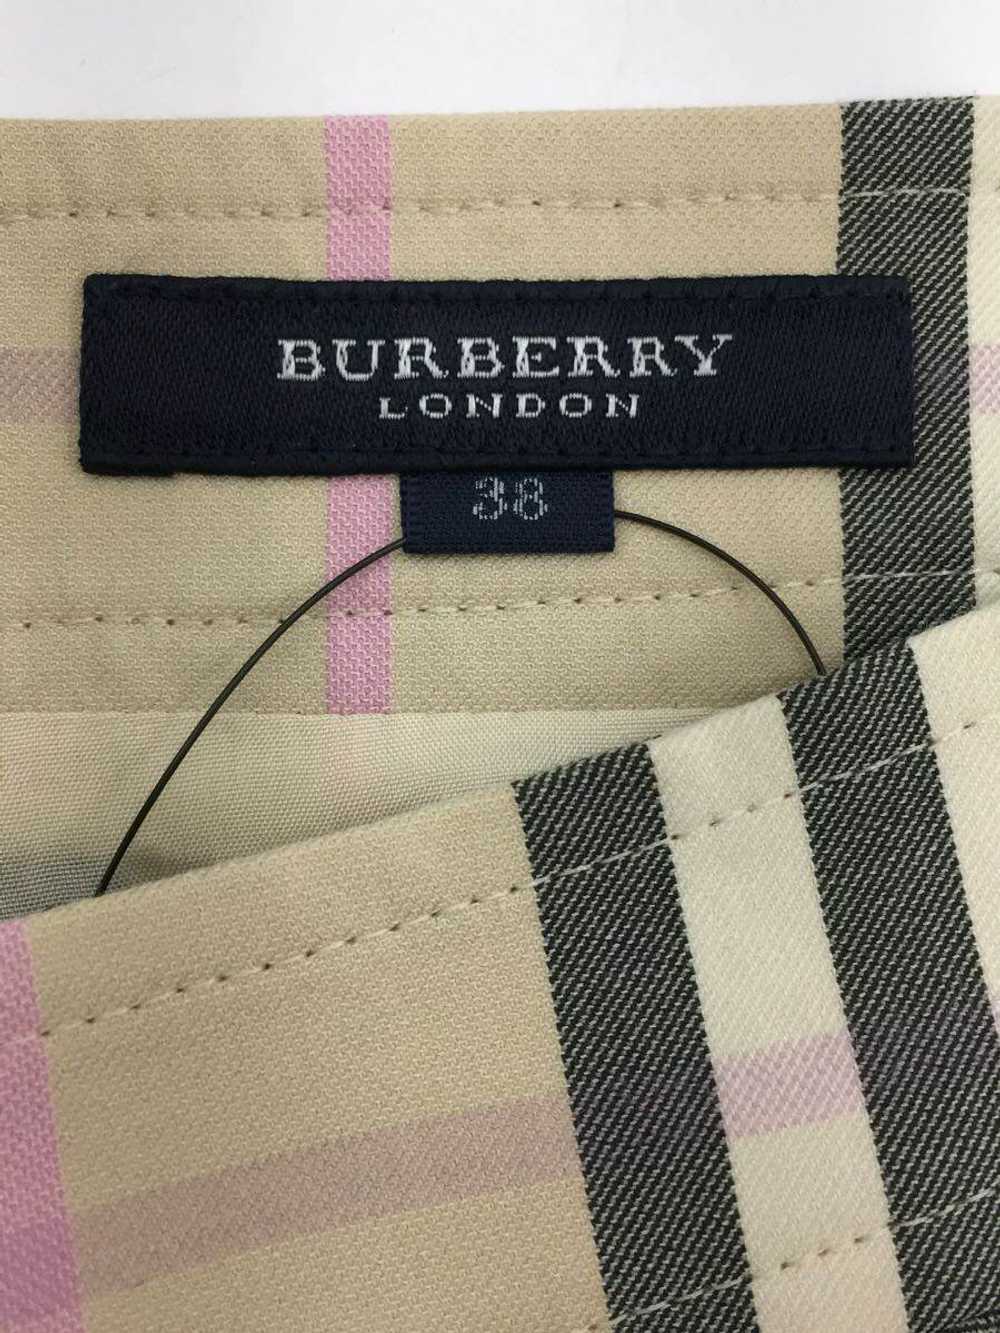 Used Burberry London Skirt/38/Cotton/Beige/Check/… - image 4